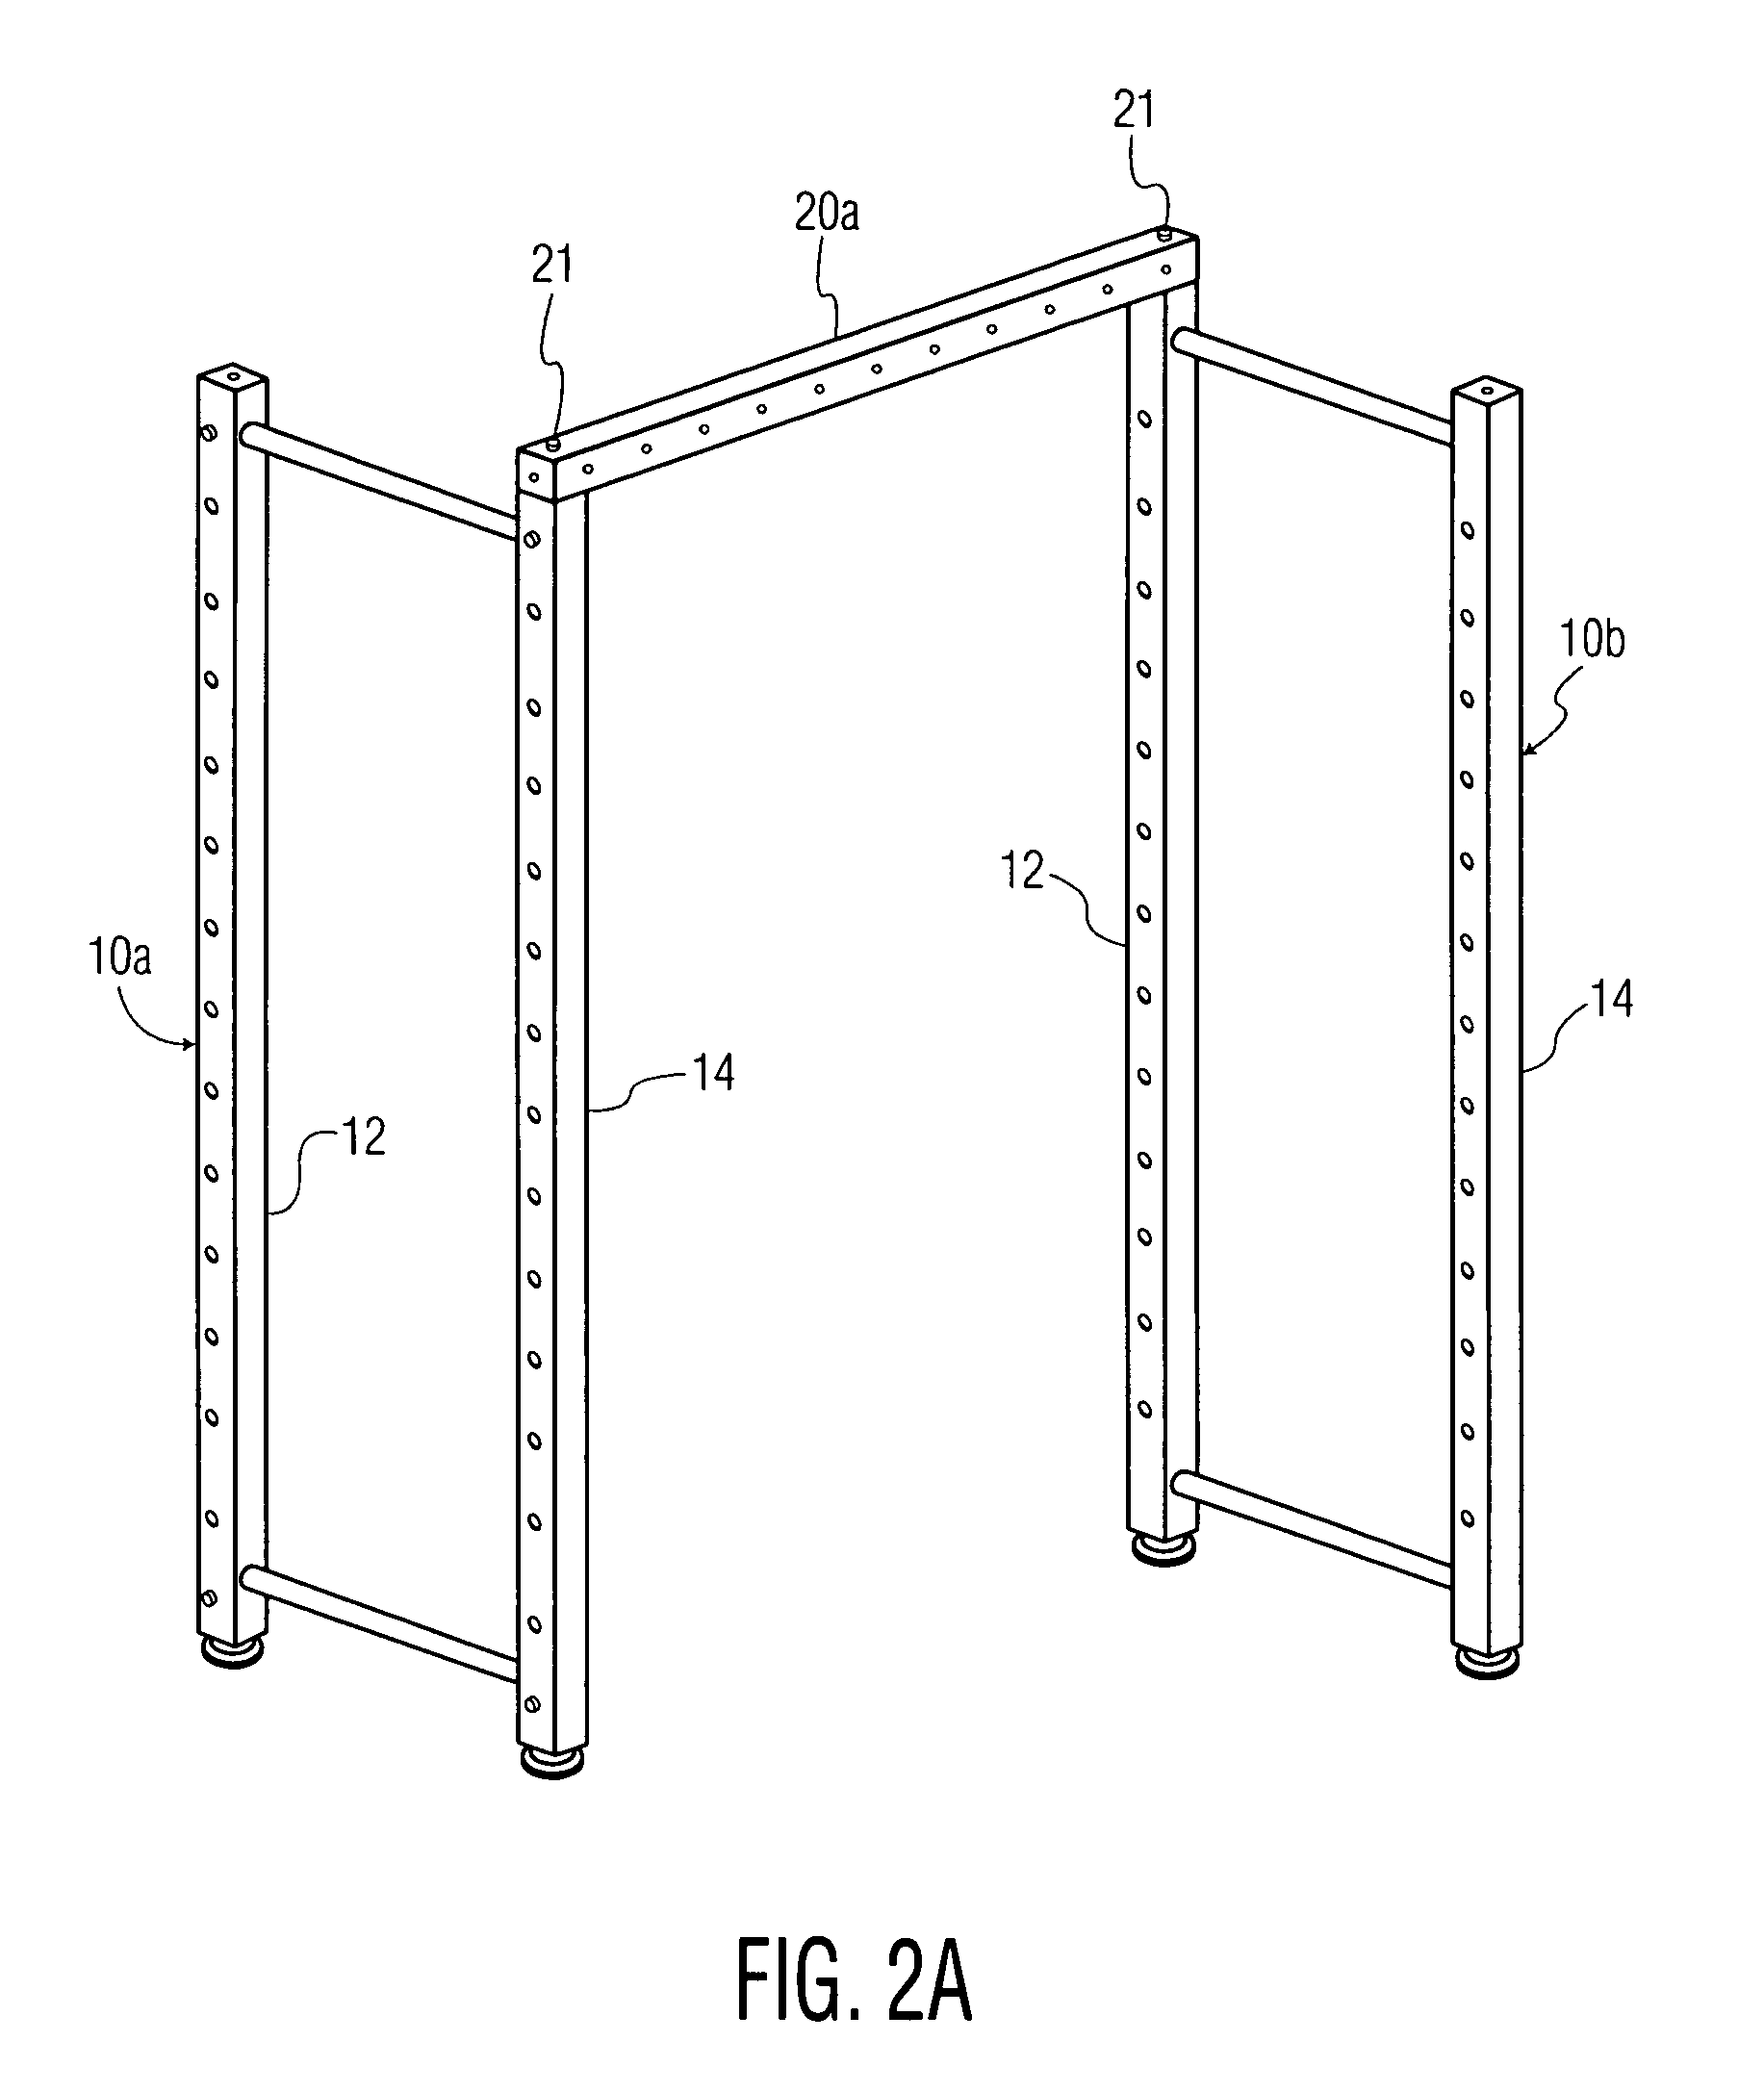 User-defined exercise apparatus